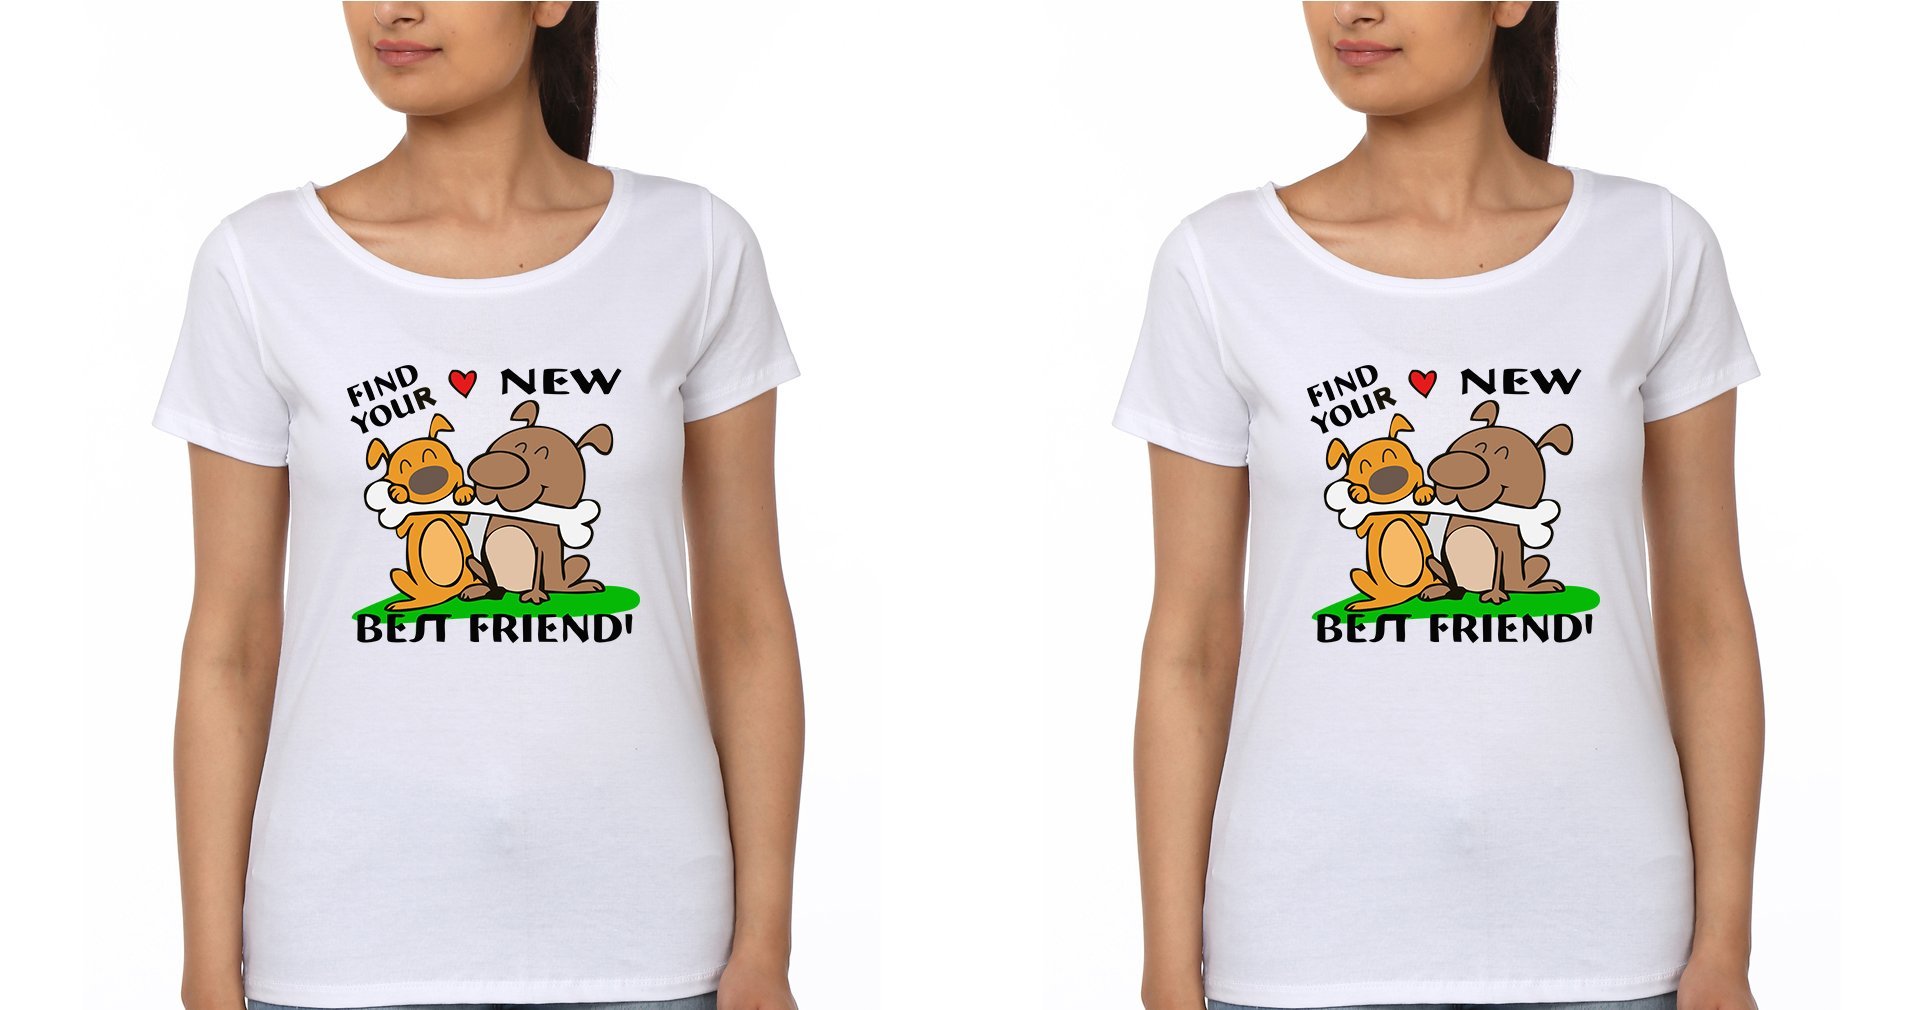 Find Your New Best friend BFF Half Sleeves T-Shirts-FunkyTees